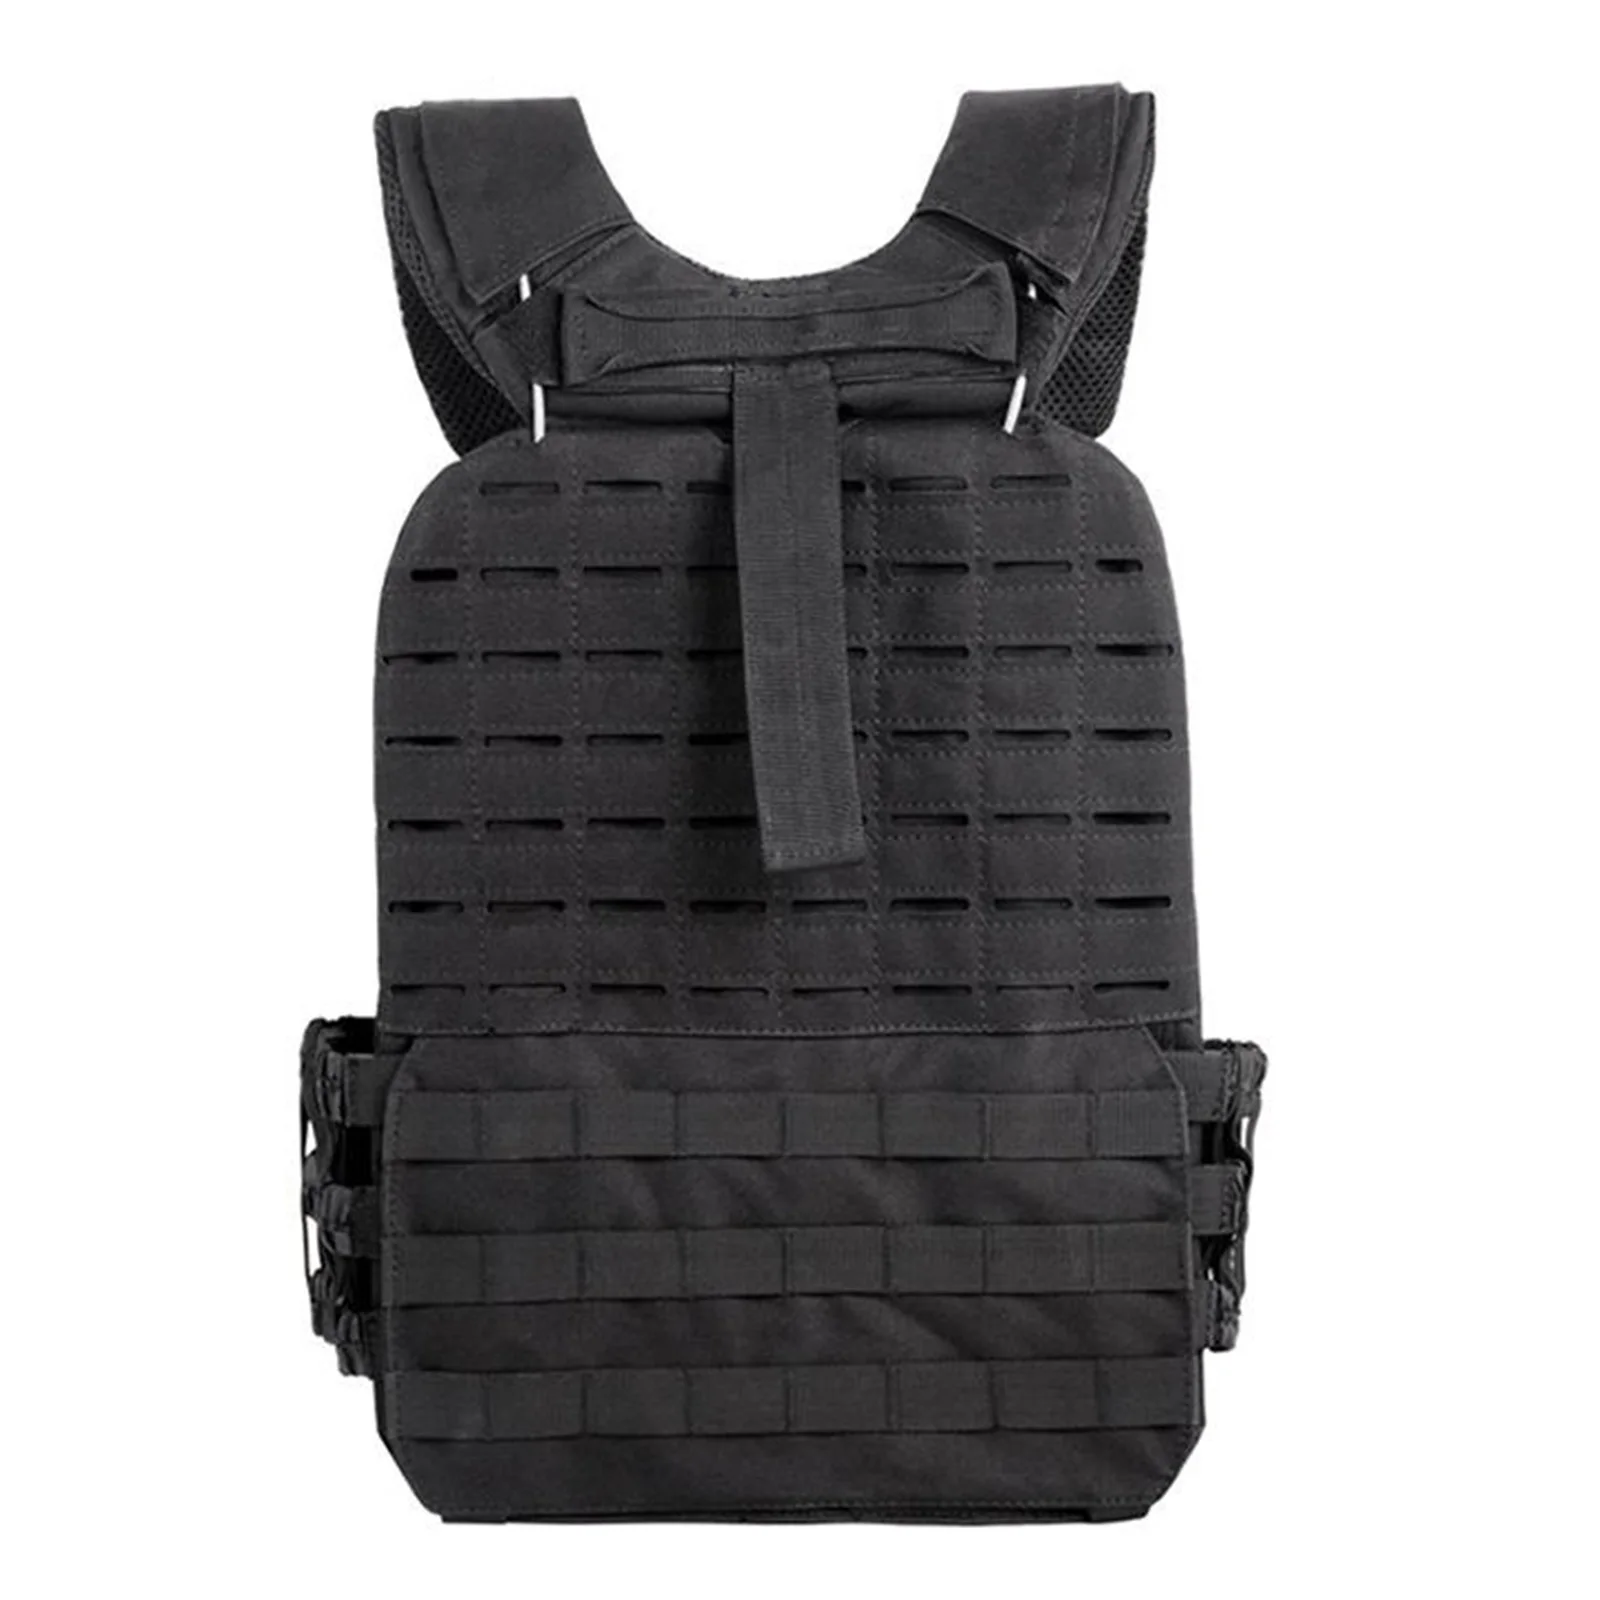 Tactical Vest Military Molle Combat Hunting Hiking Training Vest